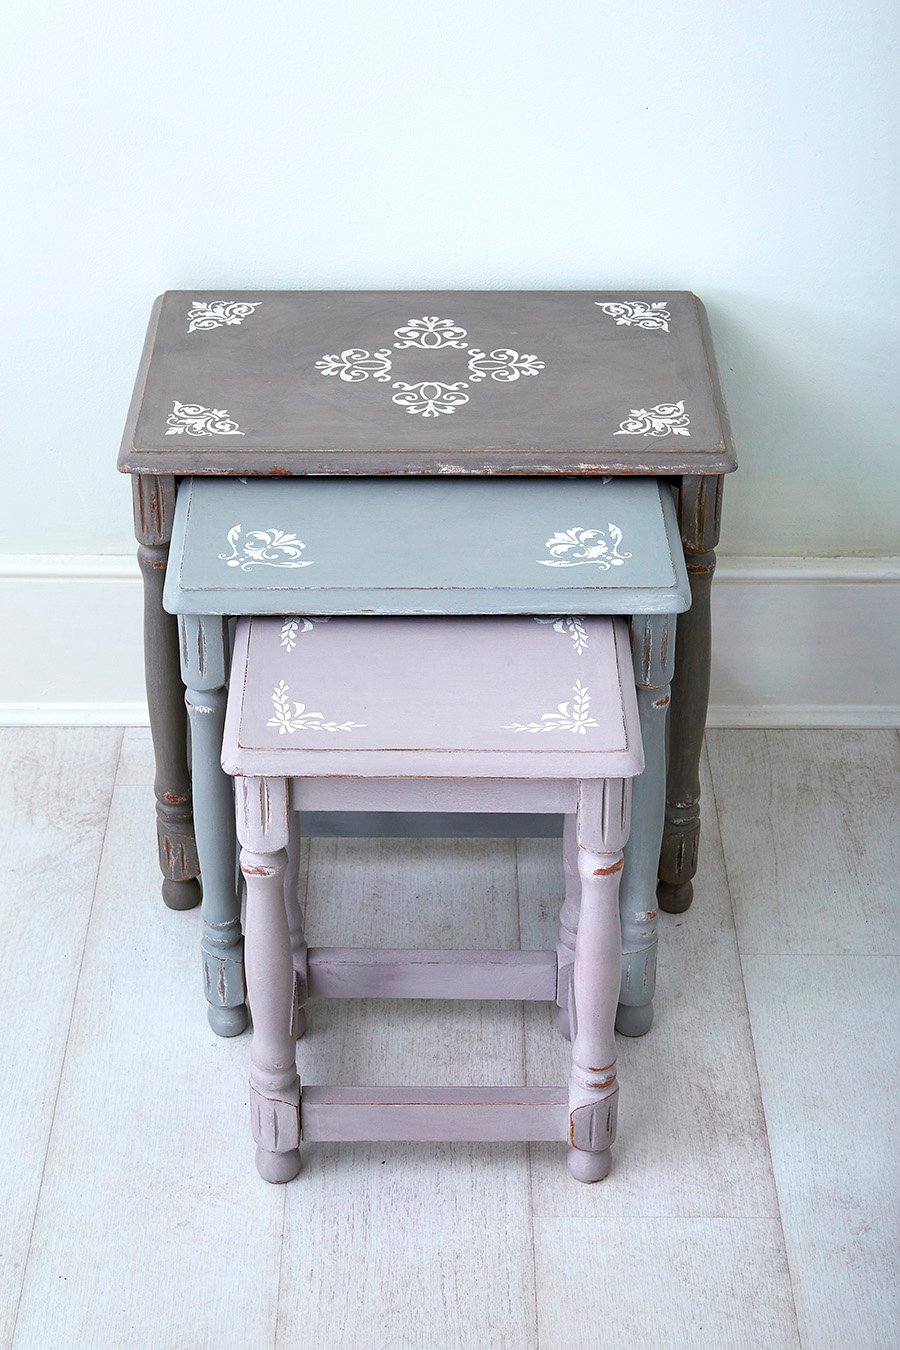 Image of Small Tables - peek here for Various Shapes & Styles...